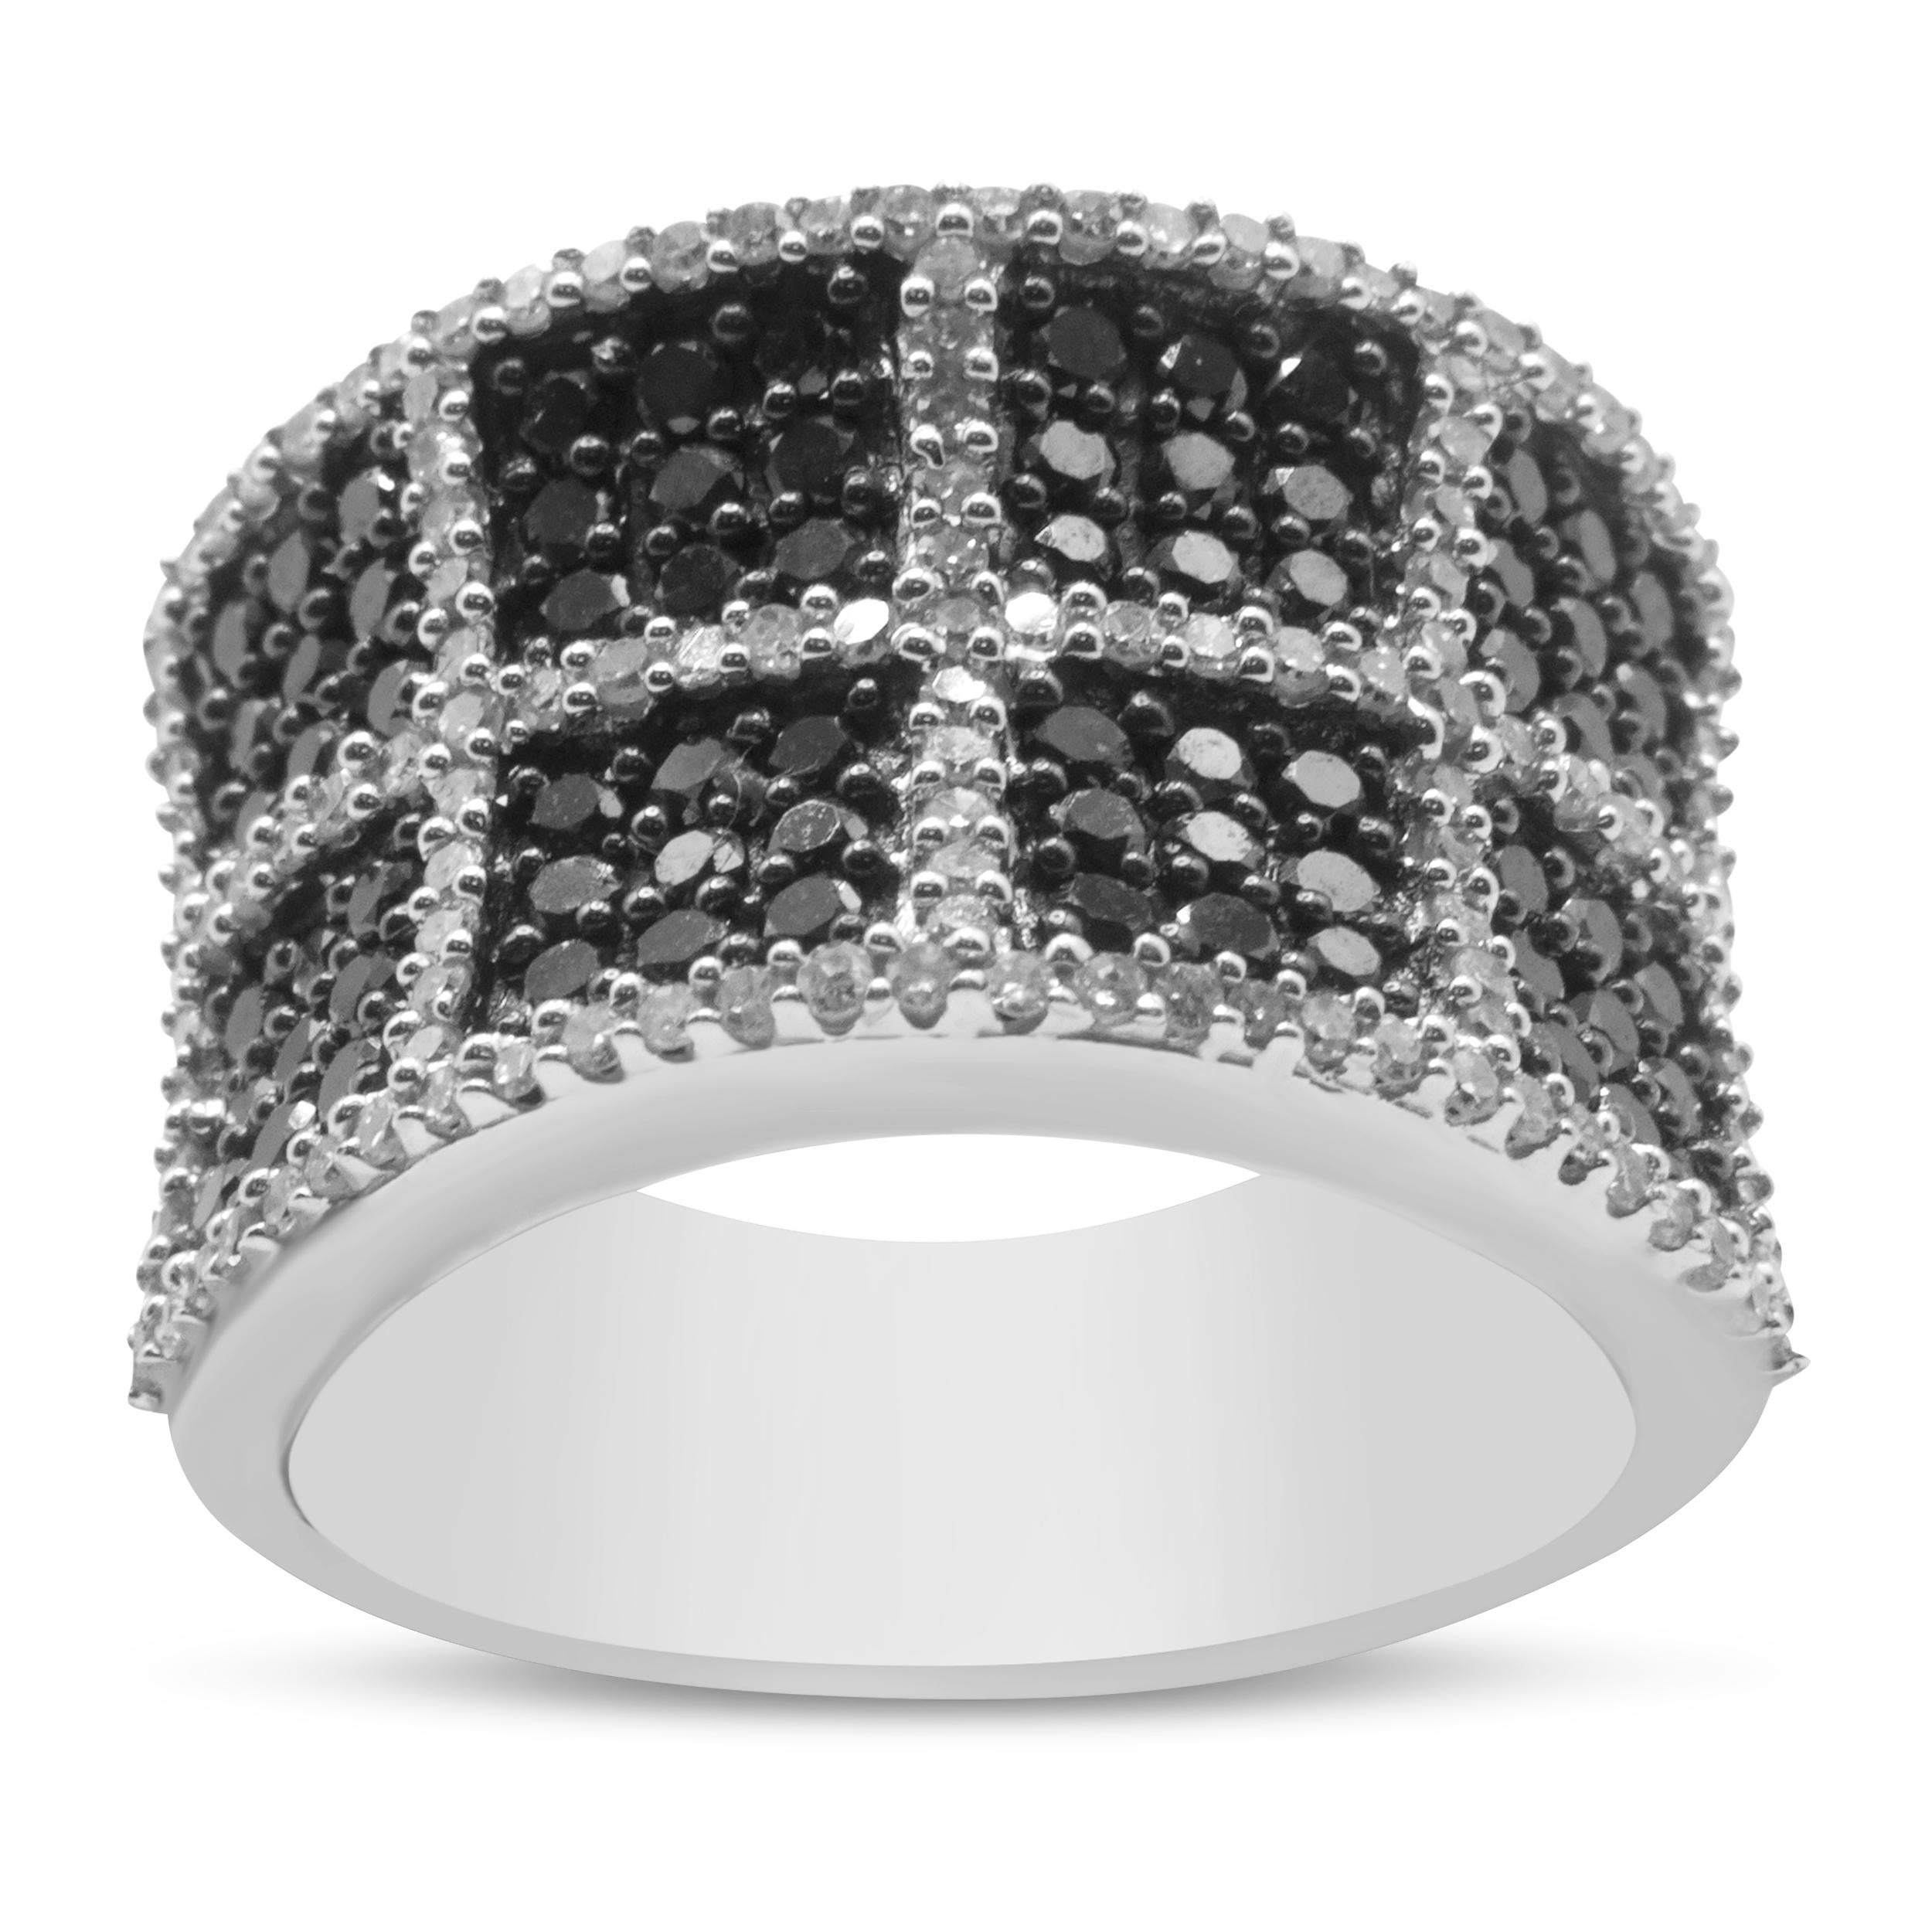 Bold and striking, this glamorous 1 1/2 cttw diamond cocktail ring will bring magnificent glamour to any outfit you wear! This stunning band is crafted in 14k white gold, a metal that will stay tarnish free for years to come. The design of this ring